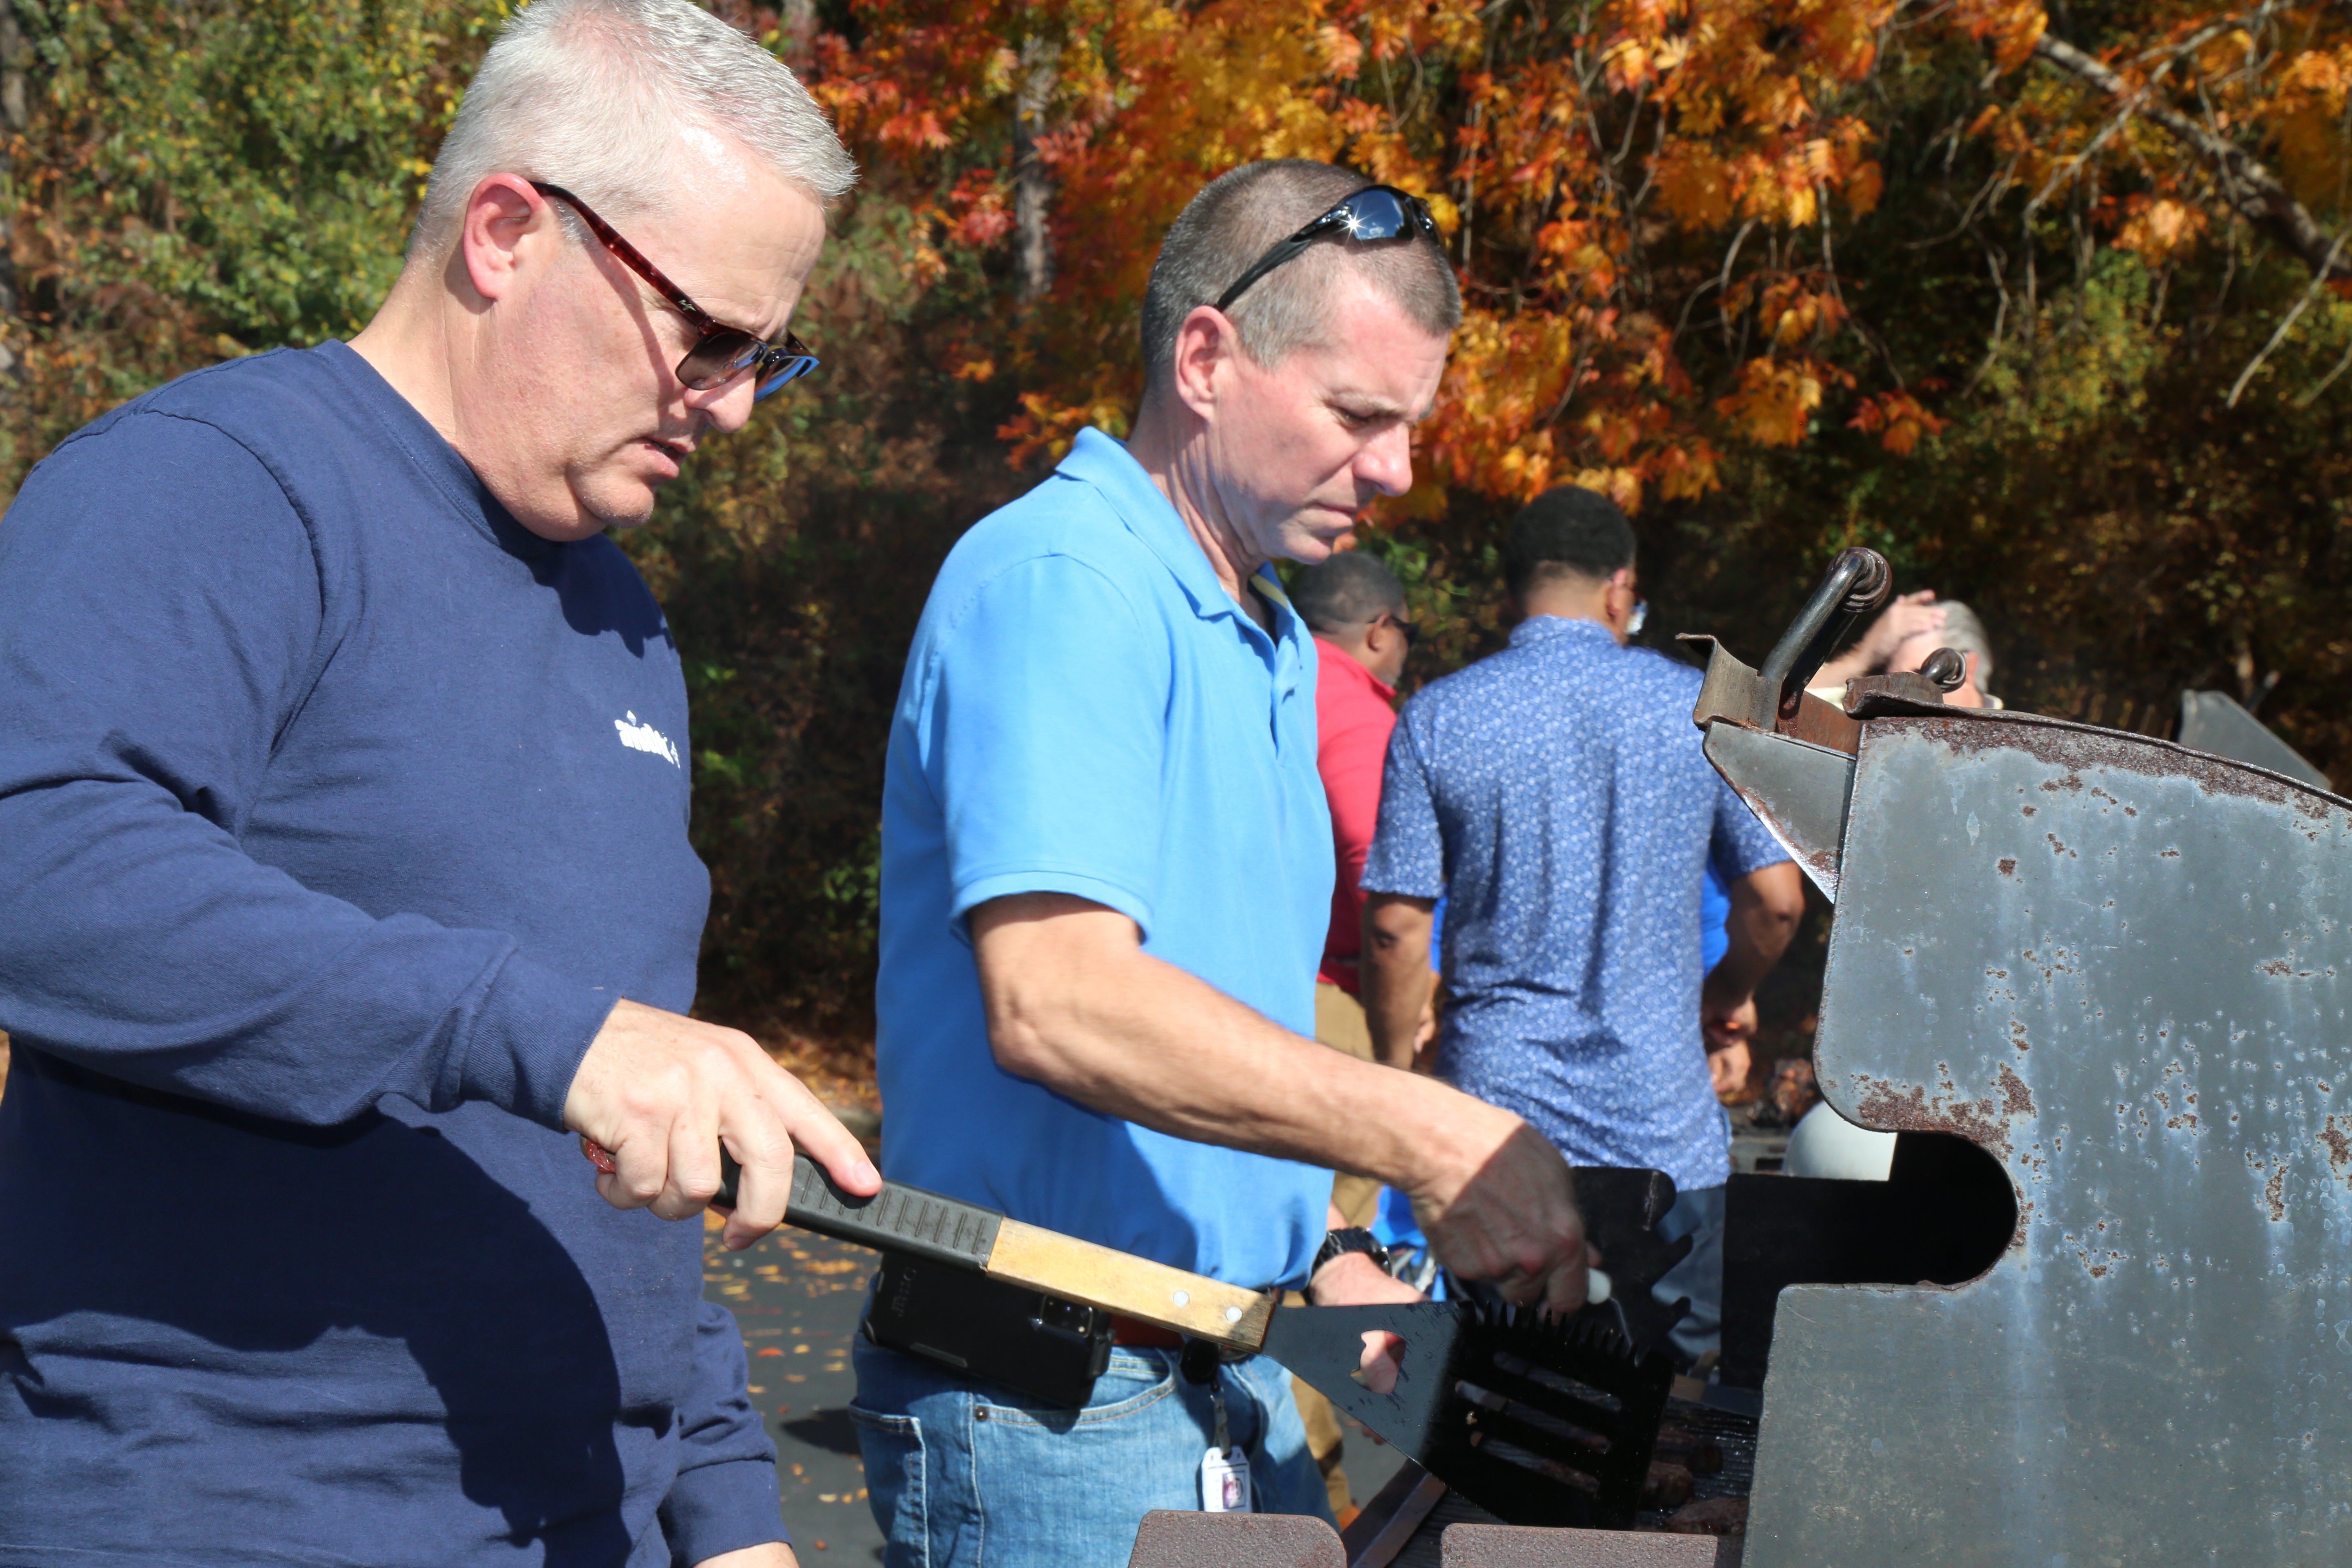 Avidex team members preparing food during company cookout event.